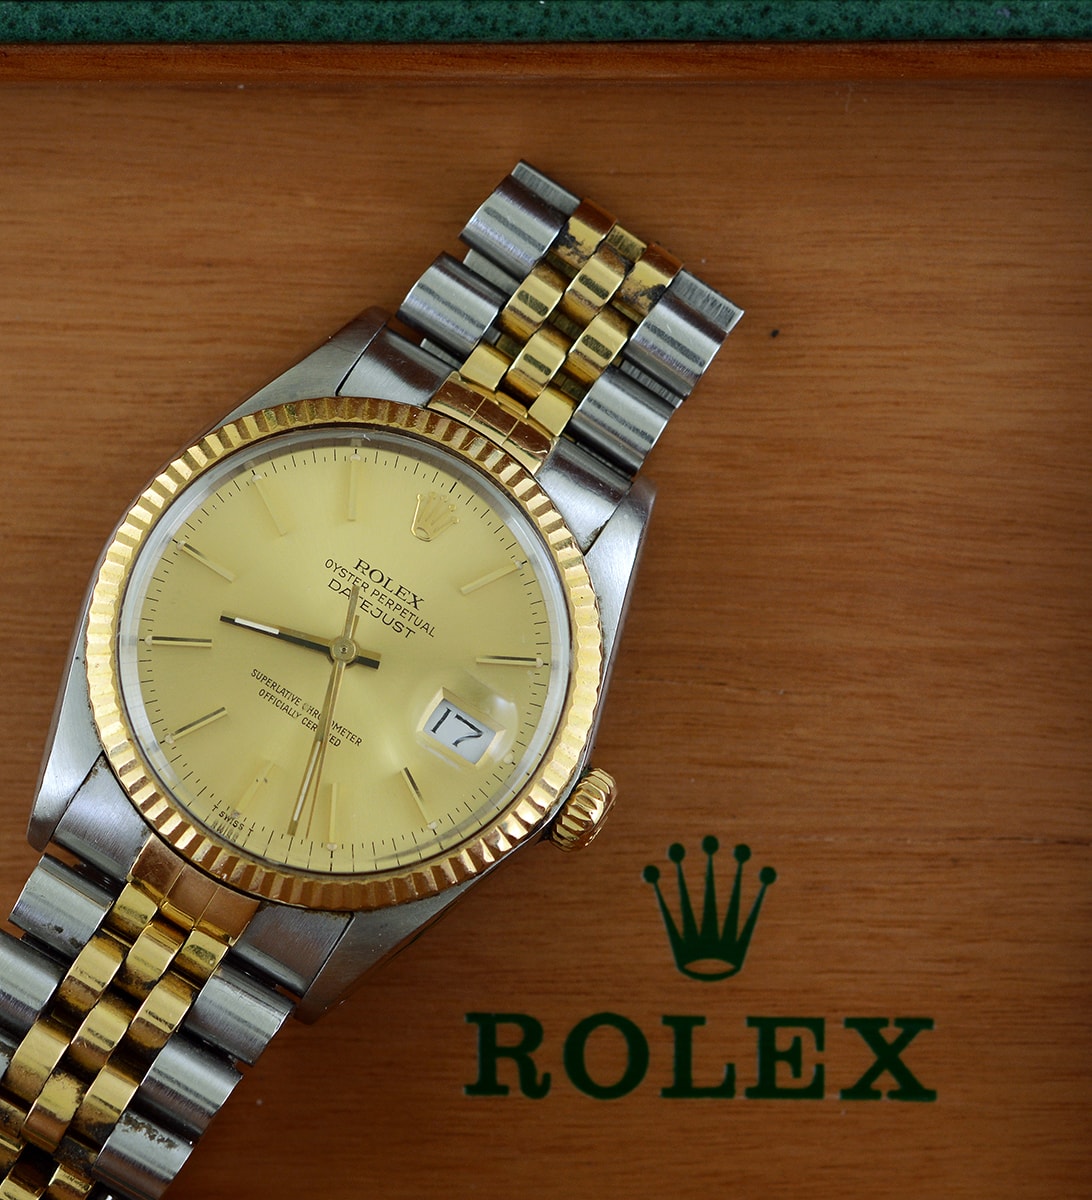 Specializing in Rolex watches